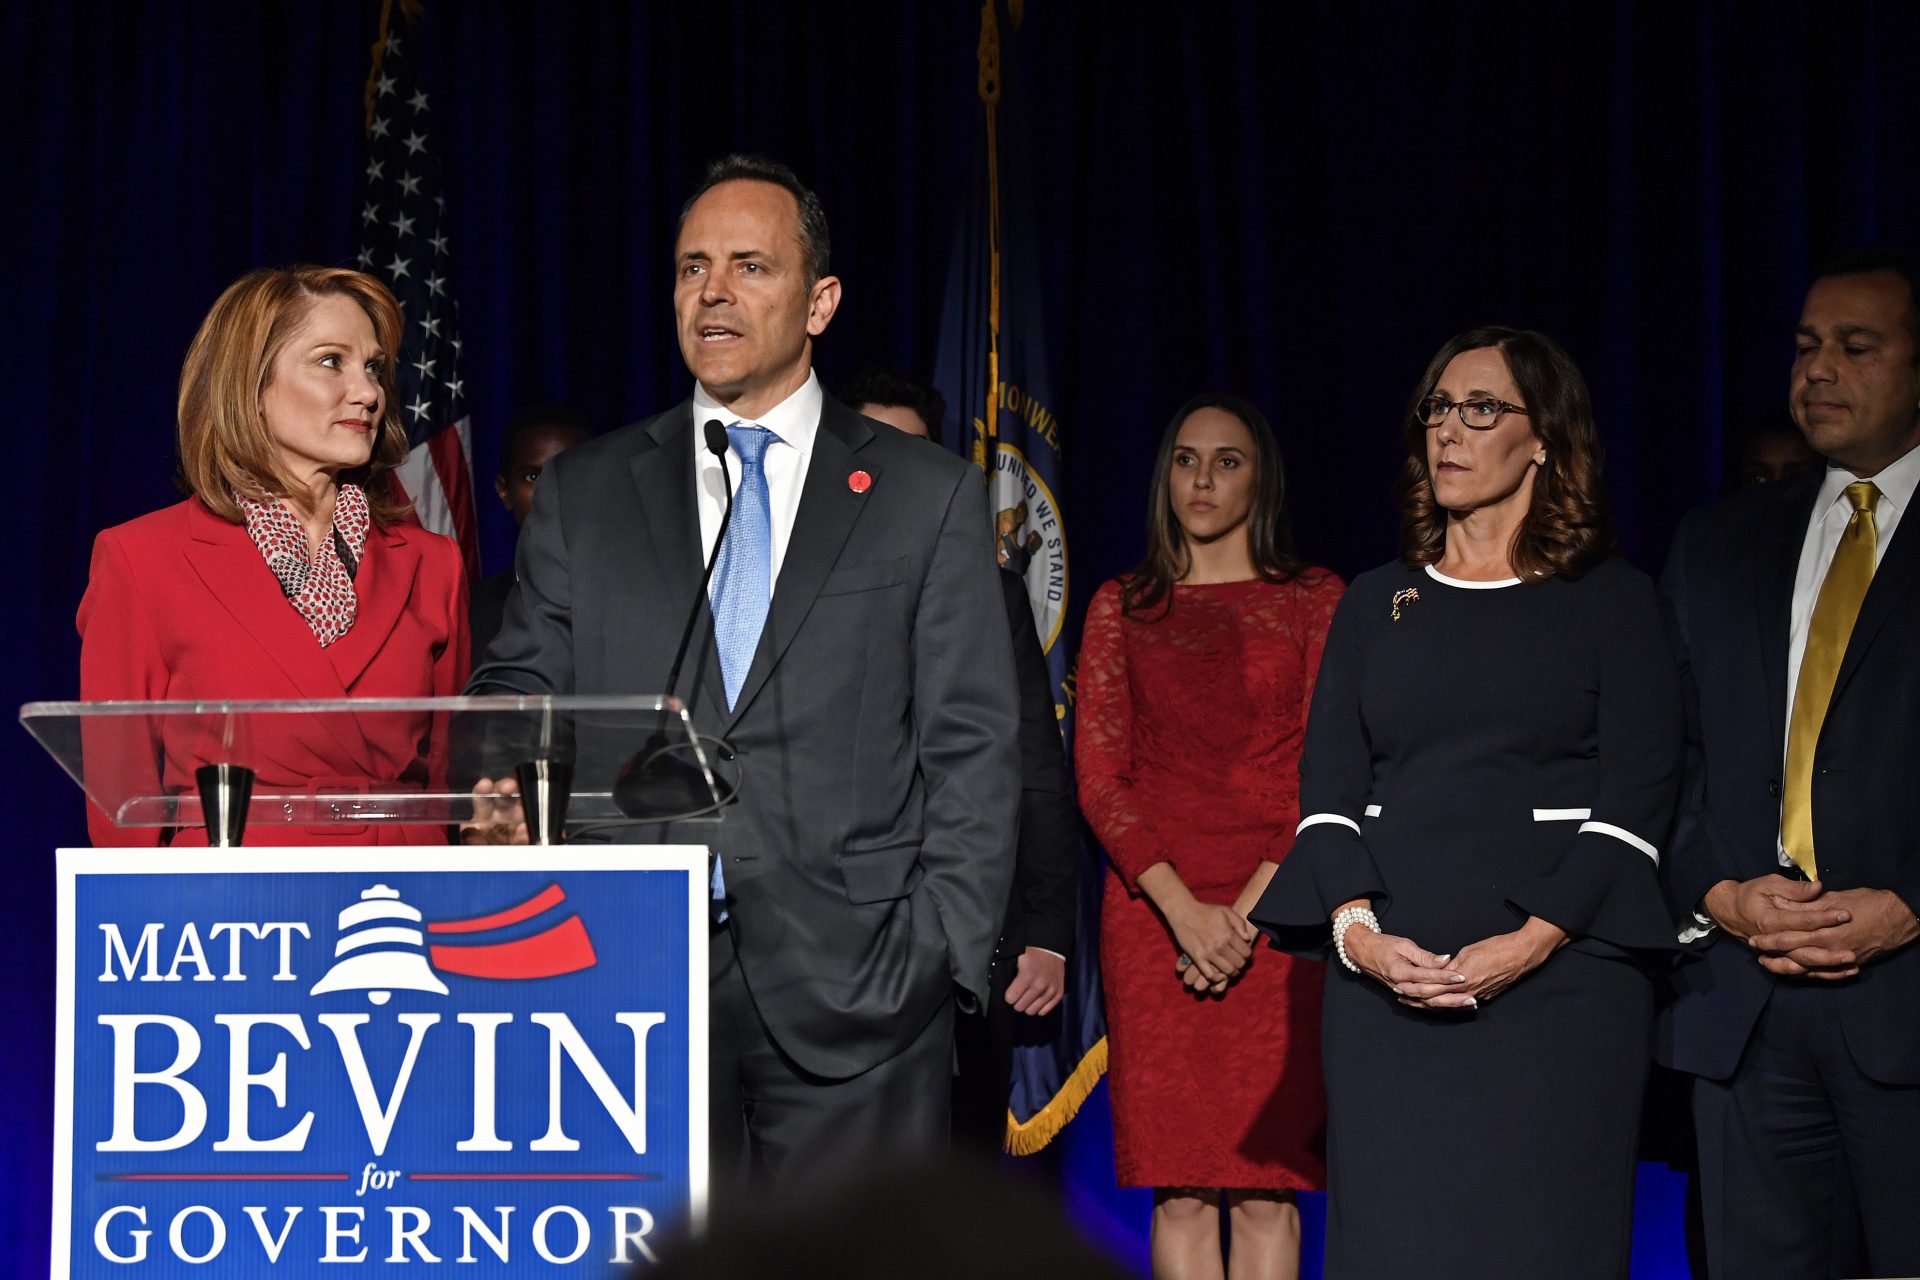 Kentucky Gov. Matt Bevin, right, with his wife Glenna, speaks to supporters gathered at the republican party celebration event in Louisville, Ky., Tuesday, Nov. 5, 2019.